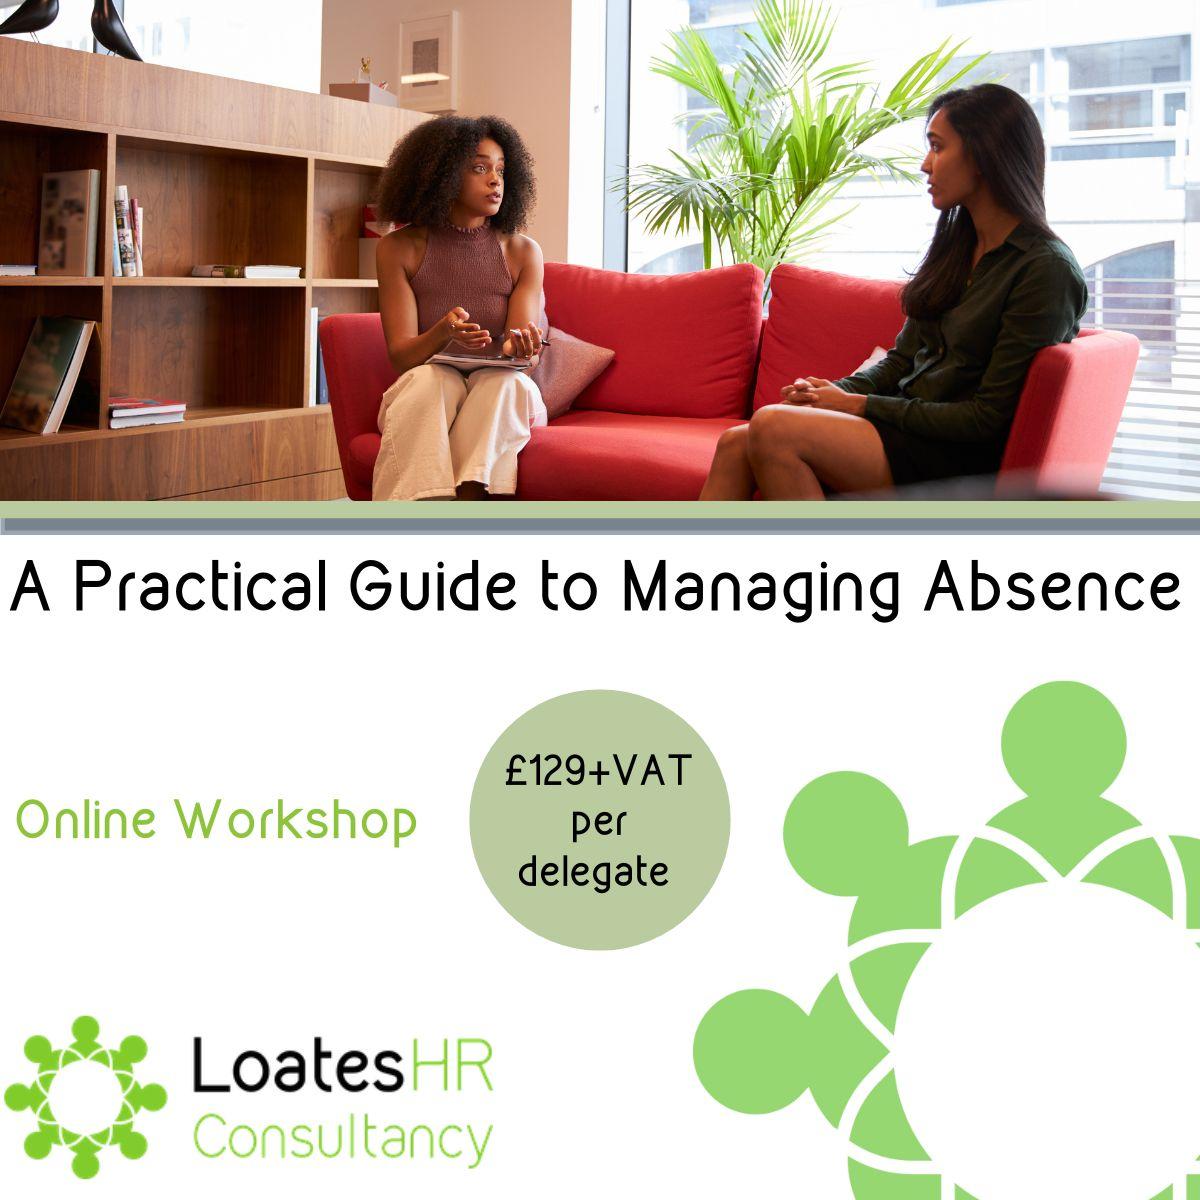 Get ready to manage absence effectively! 🤝 Join us on Wed 3 May 2023 for our online course, 'A Practical Guide to Managing Absence' and learn the skills to help you and your business. #absencemanagement #managingabsence #HR #training #onlinecourse 💻 bit.ly/3jlMcCS